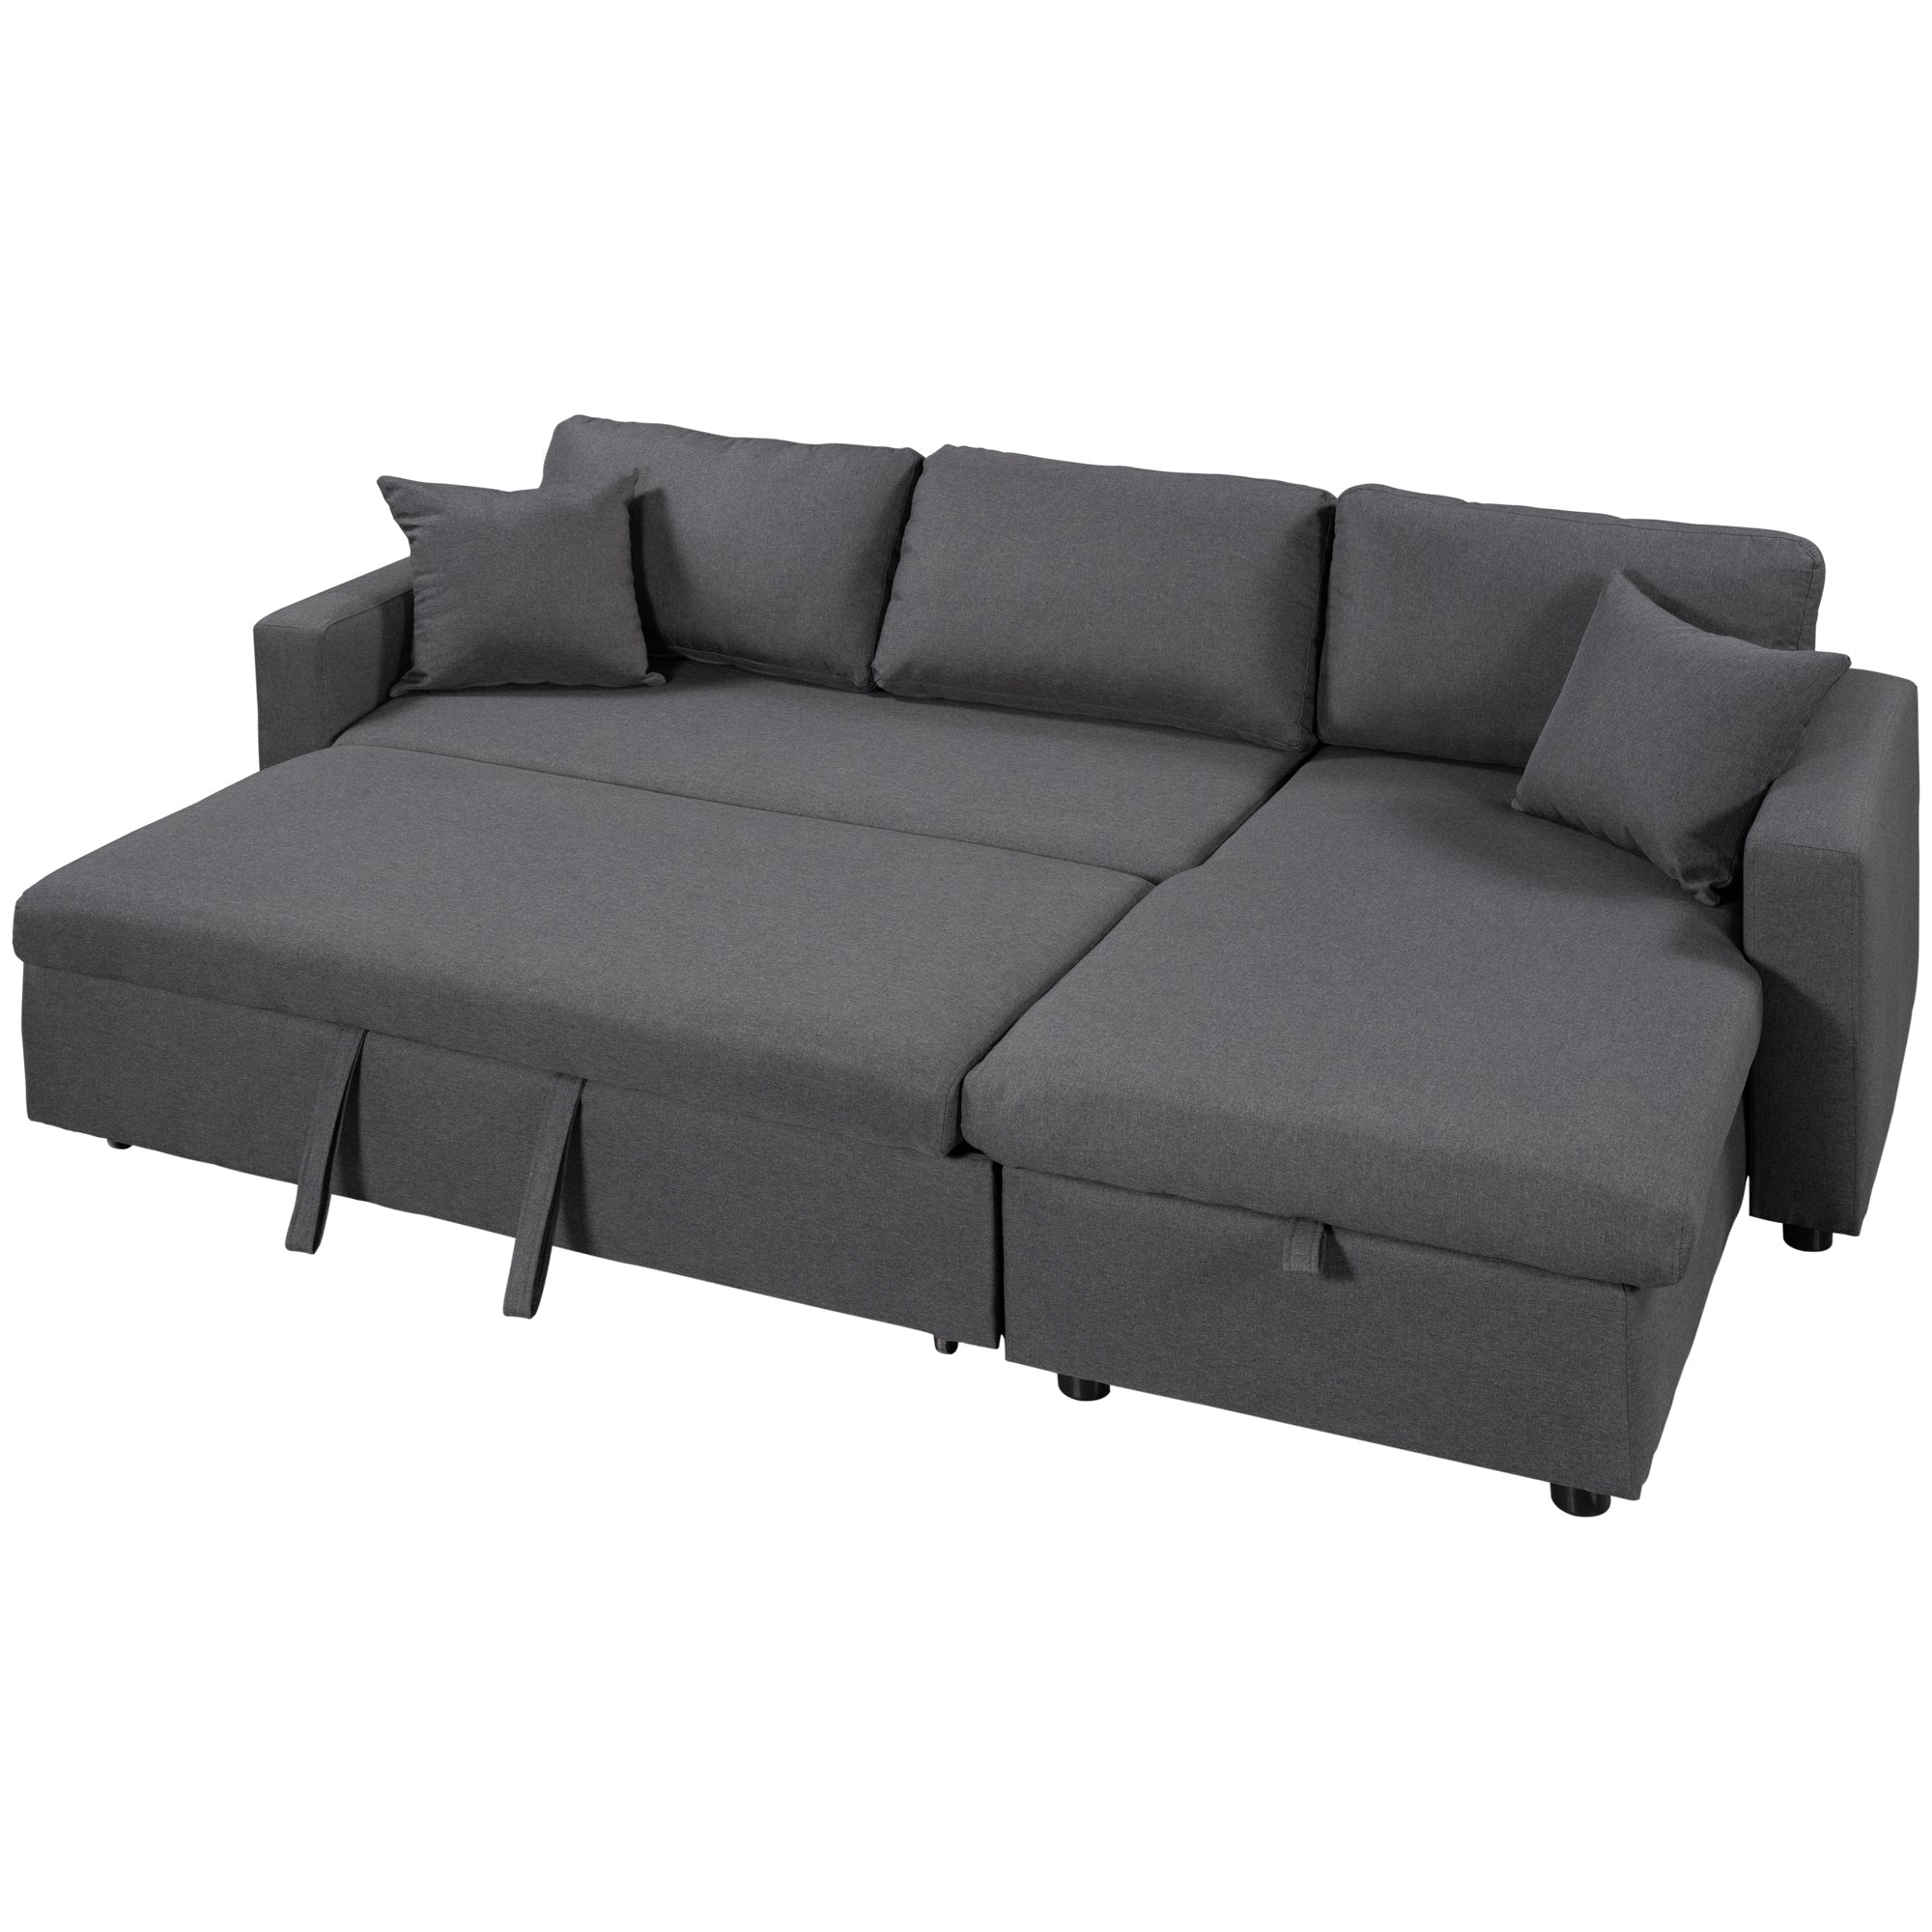 U-Style Upholstery Sleeper Sectional Sofa in Grey with Storage Space, 2 Tossing Cushions | Stylish and Functional Addition to Your Living Space-Sleeper Sectionals-American Furniture Outlet